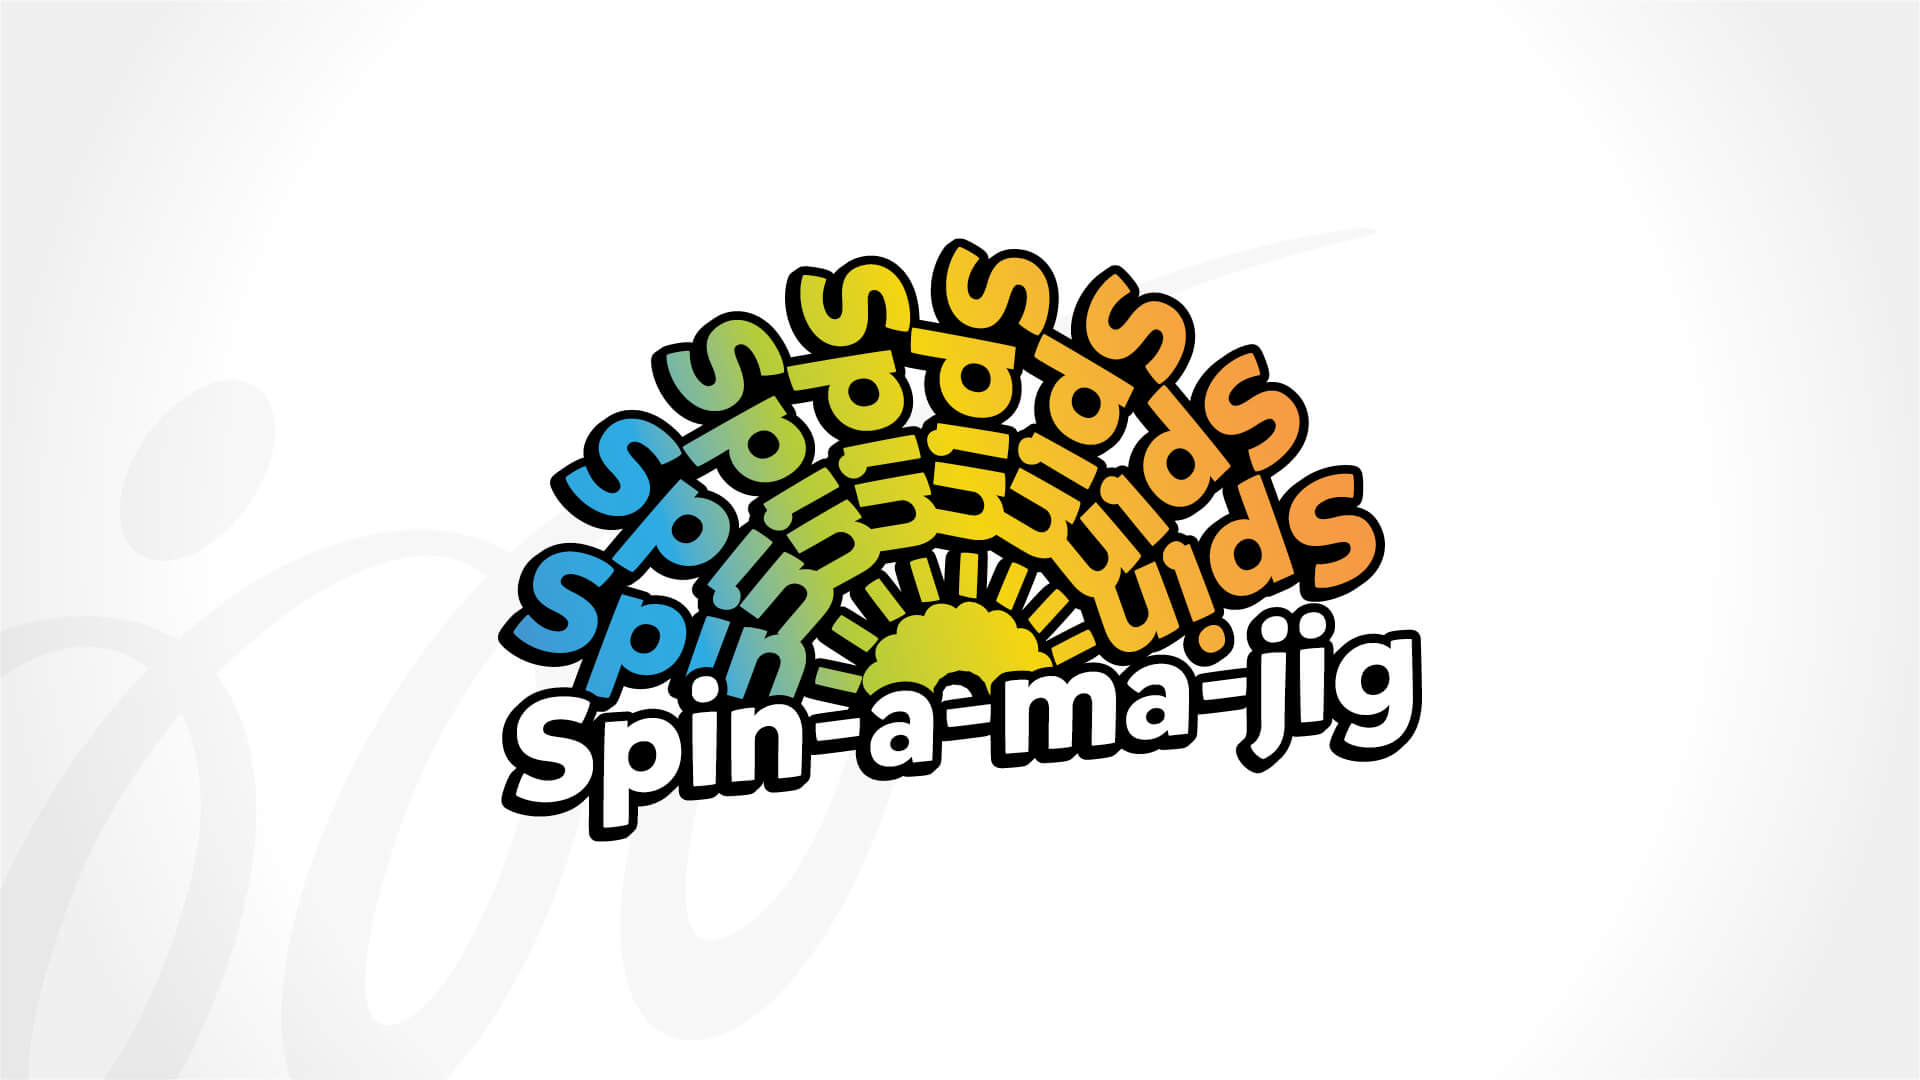 Saskatchewan Physical Literacy Working Group, Web Apps, Spin-a-ma-jig Social Contest, Portfolio Image, Spin-a-ma-jig Game Logo